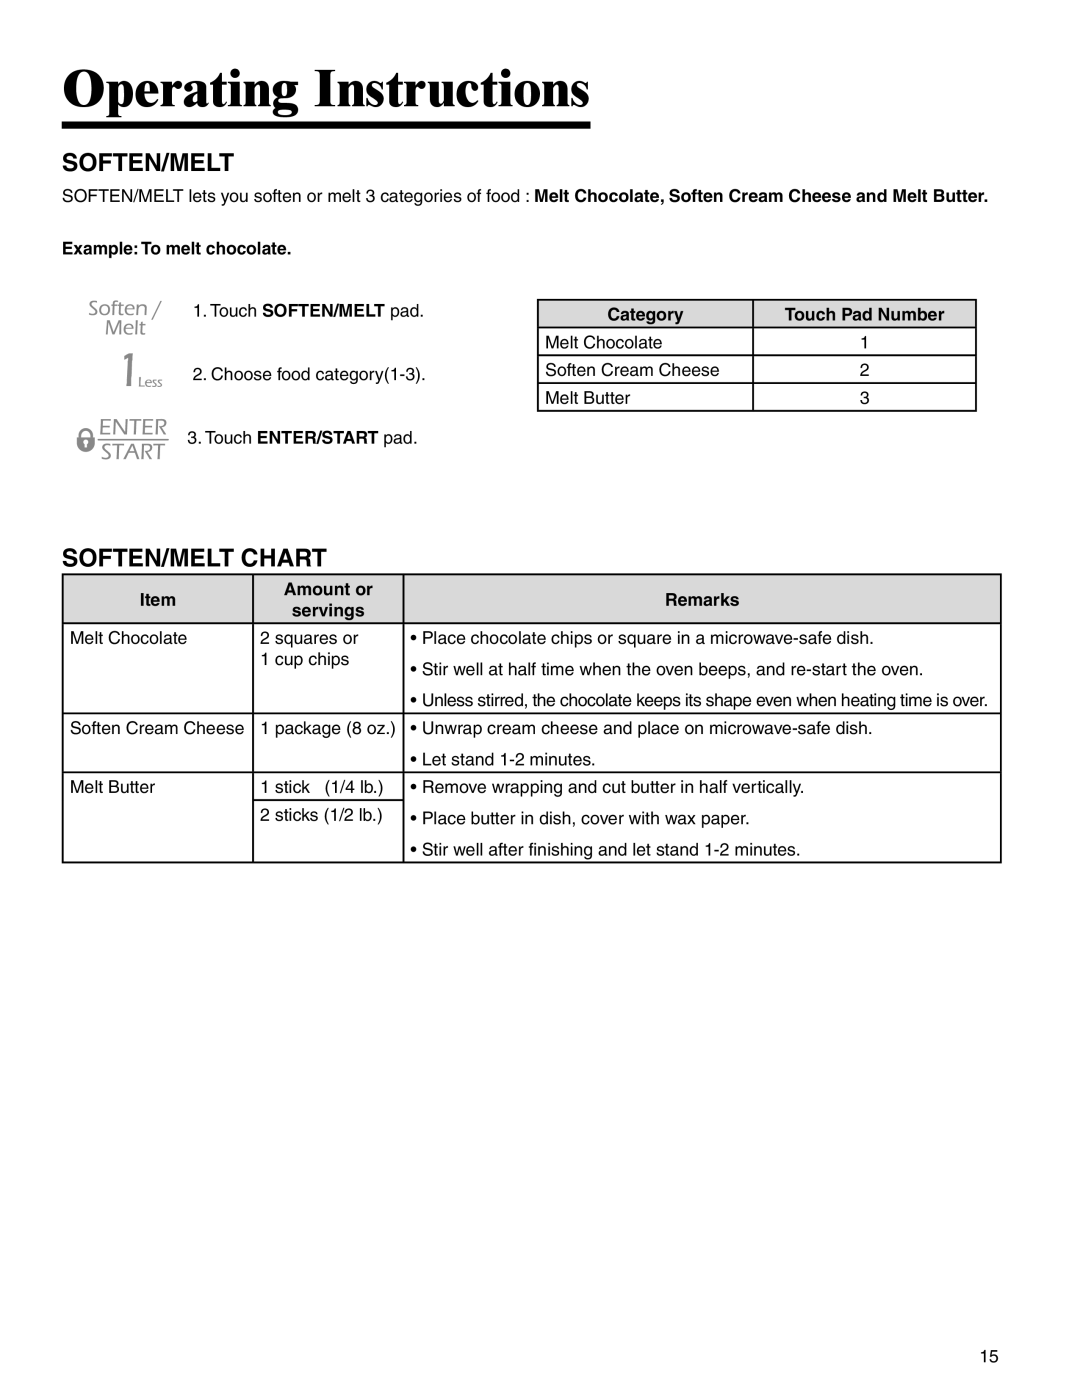 Maytag UMC5200BAB/W/S Soften/Melt Chart, Operating Instructions, Example To melt chocolate, Category, Touch Pad Number 